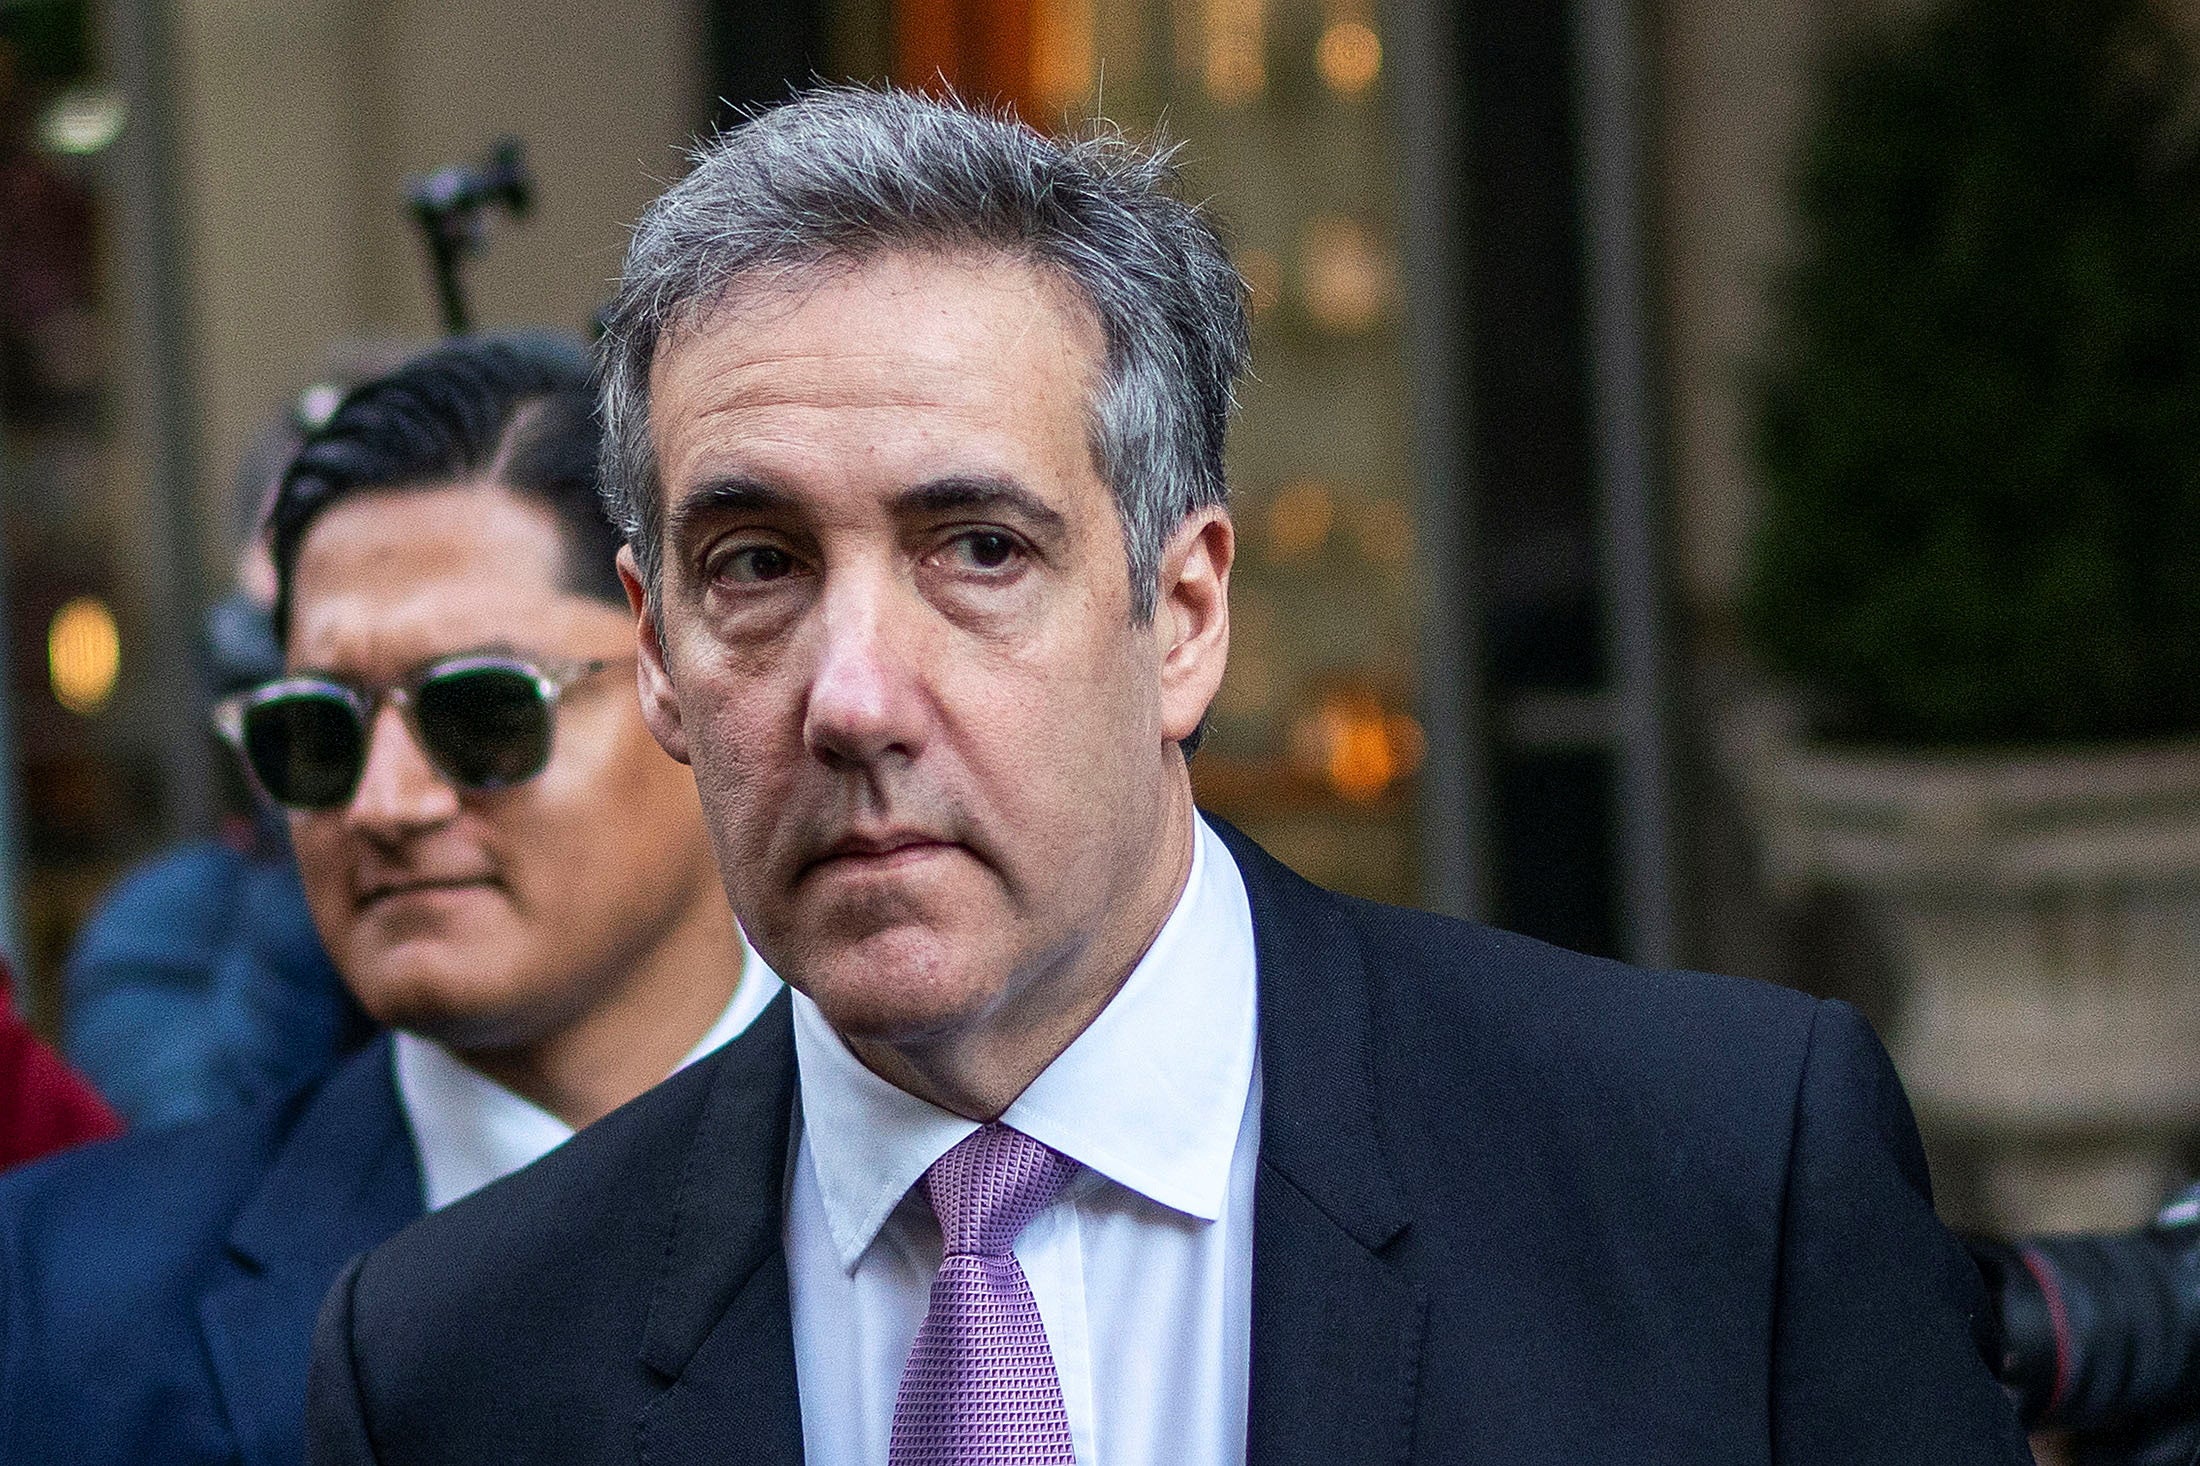 Michael Cohen departs home to testify in Republican presidential candidate Donald Trump's criminal trial in New York